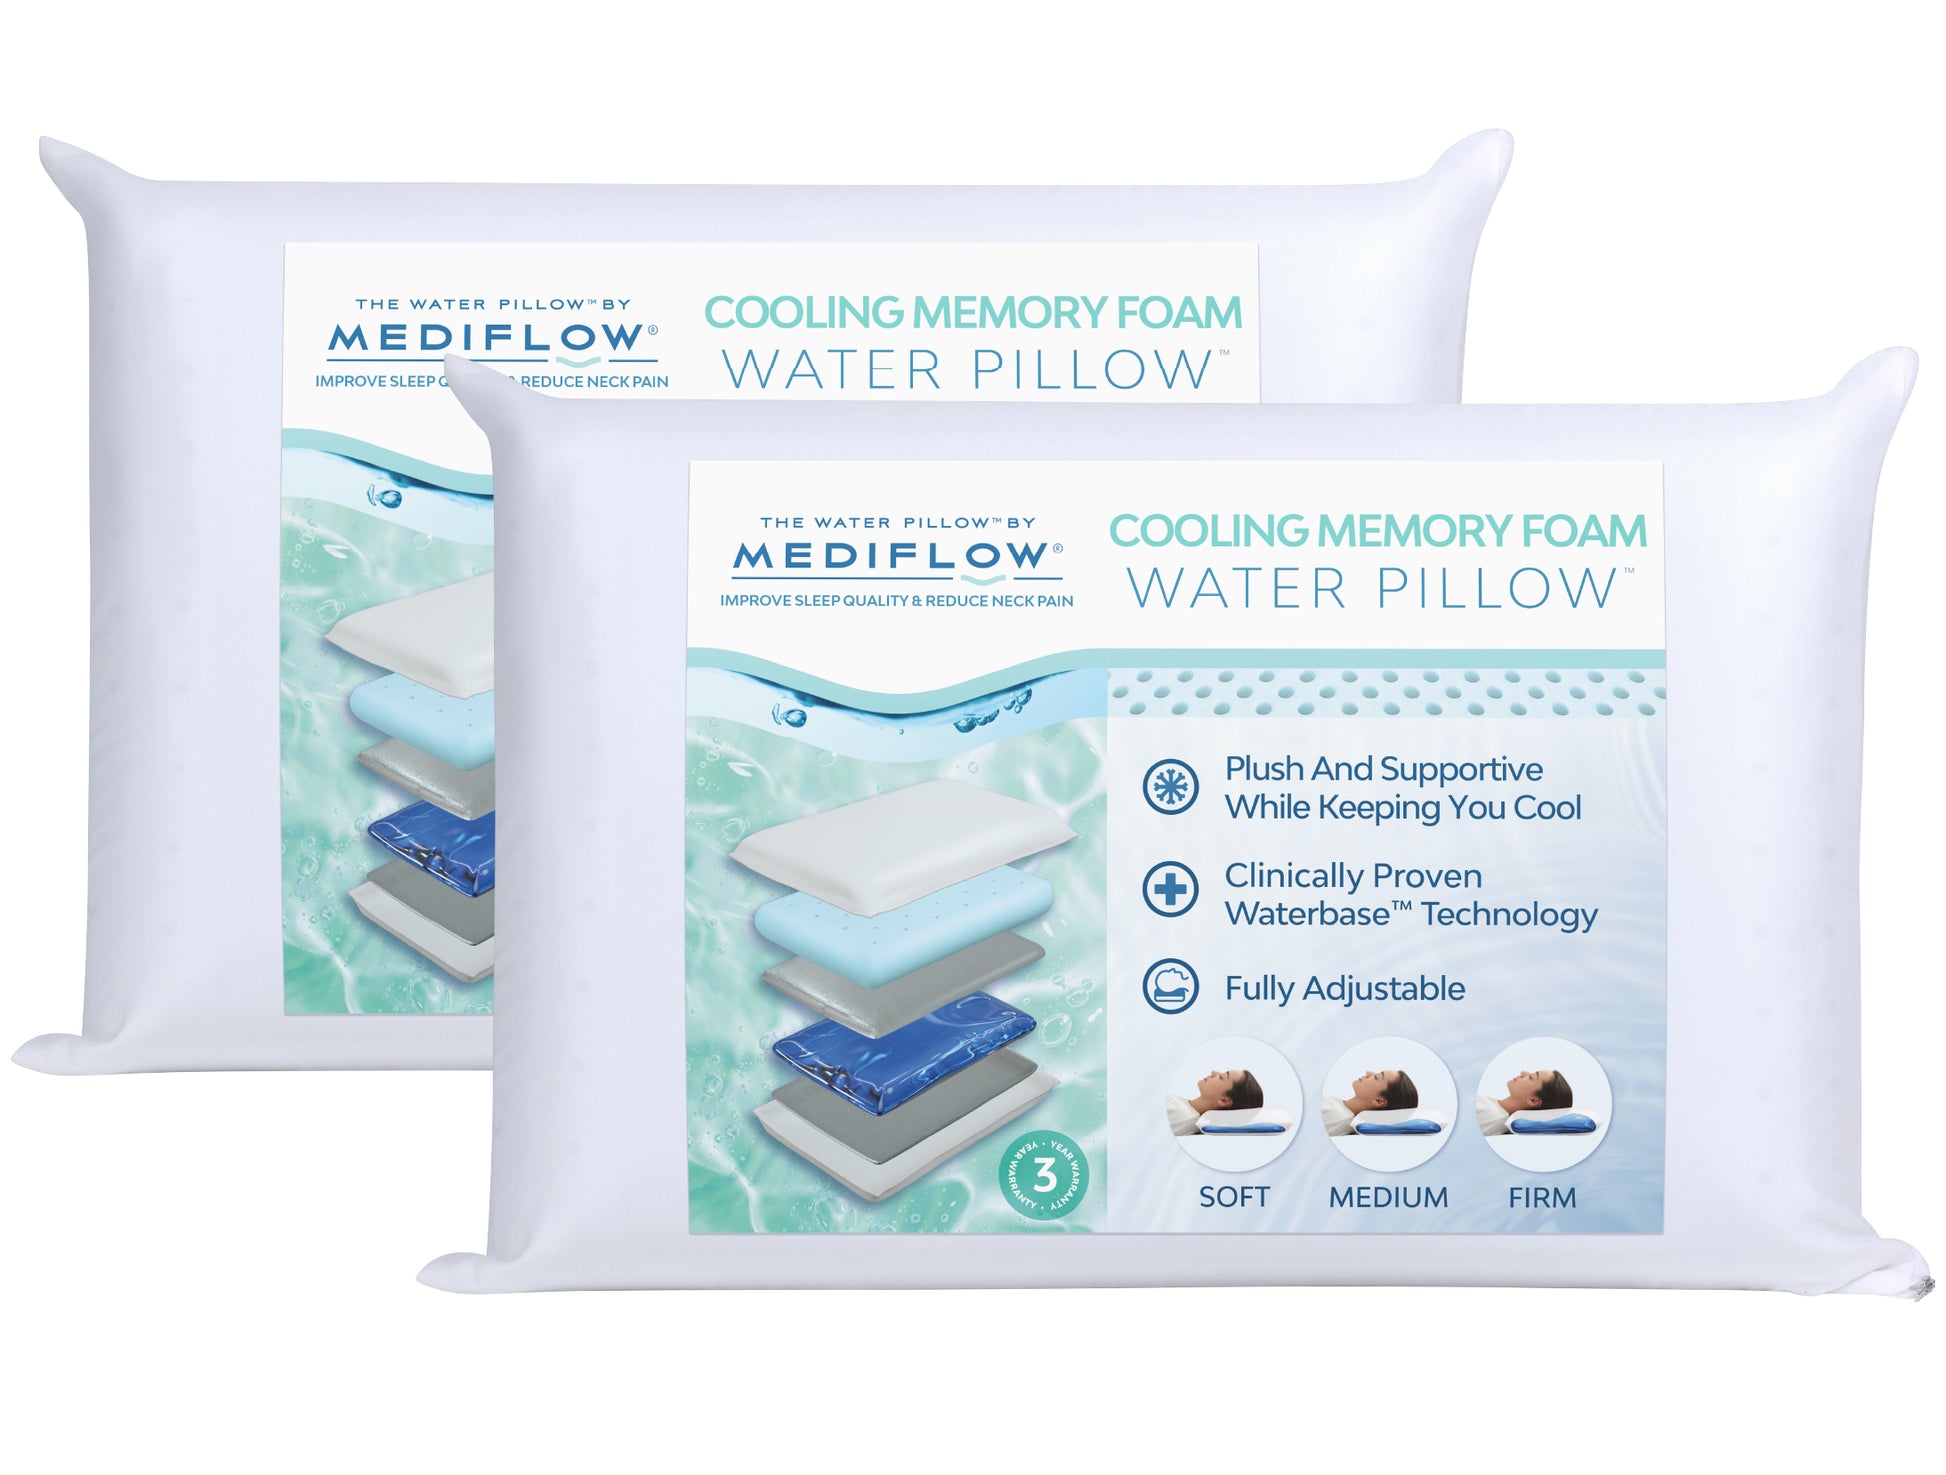 Mediflow Water Pillow Memory Foam Re-Invented with Waterbase Technology - Proven